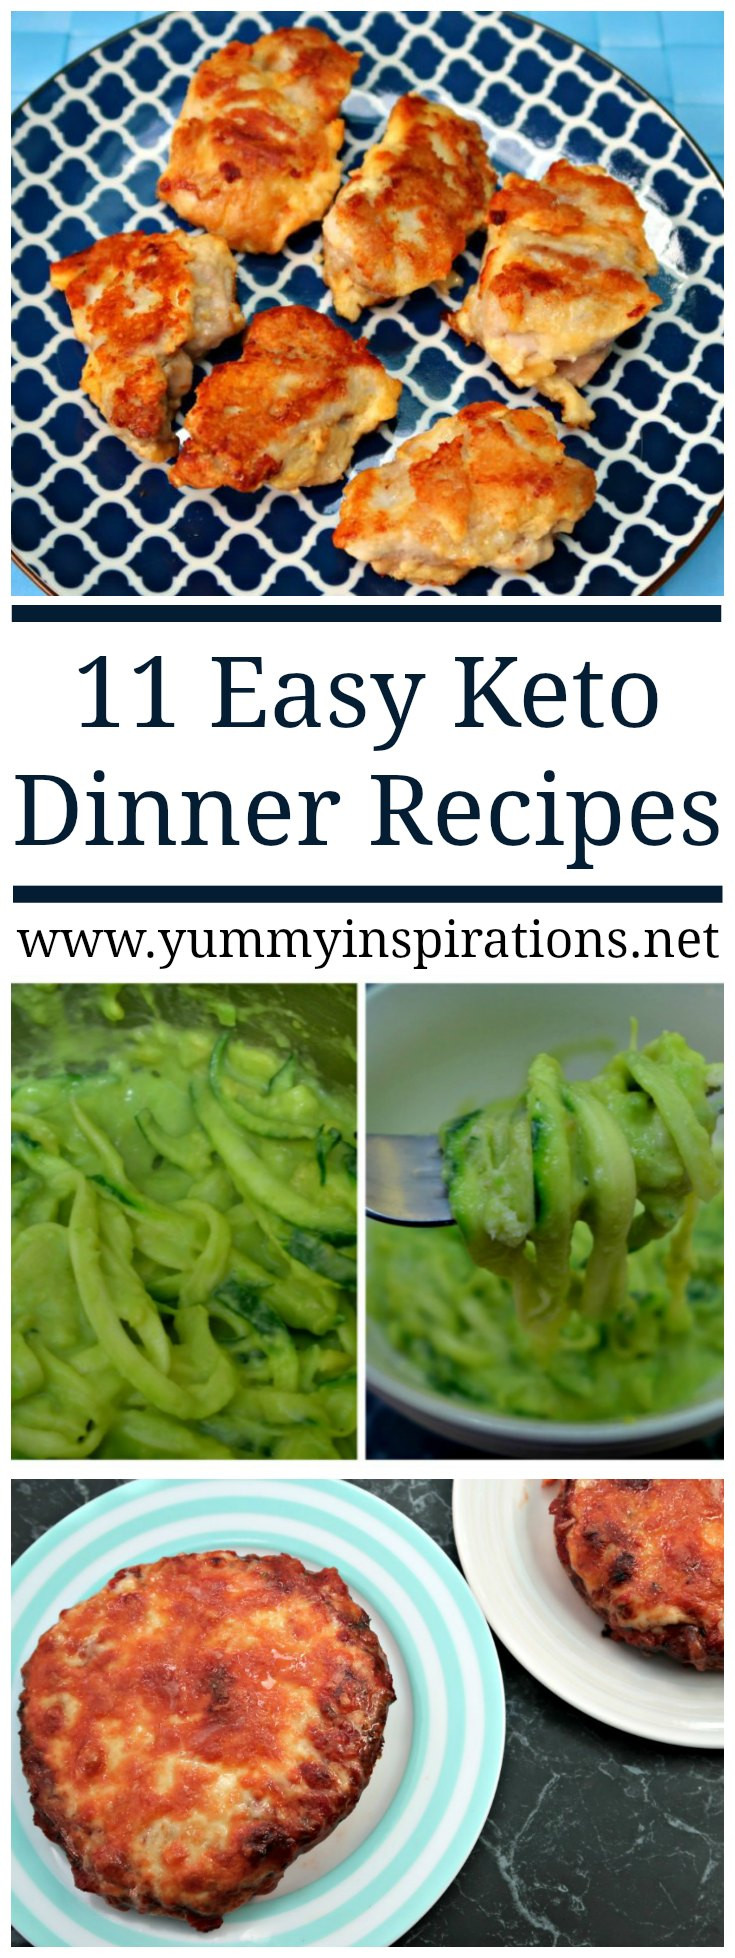 Keto Diet Recipes Dinners
 11 Easy Keto Dinner Recipes Quick Low Carb Ketogenic